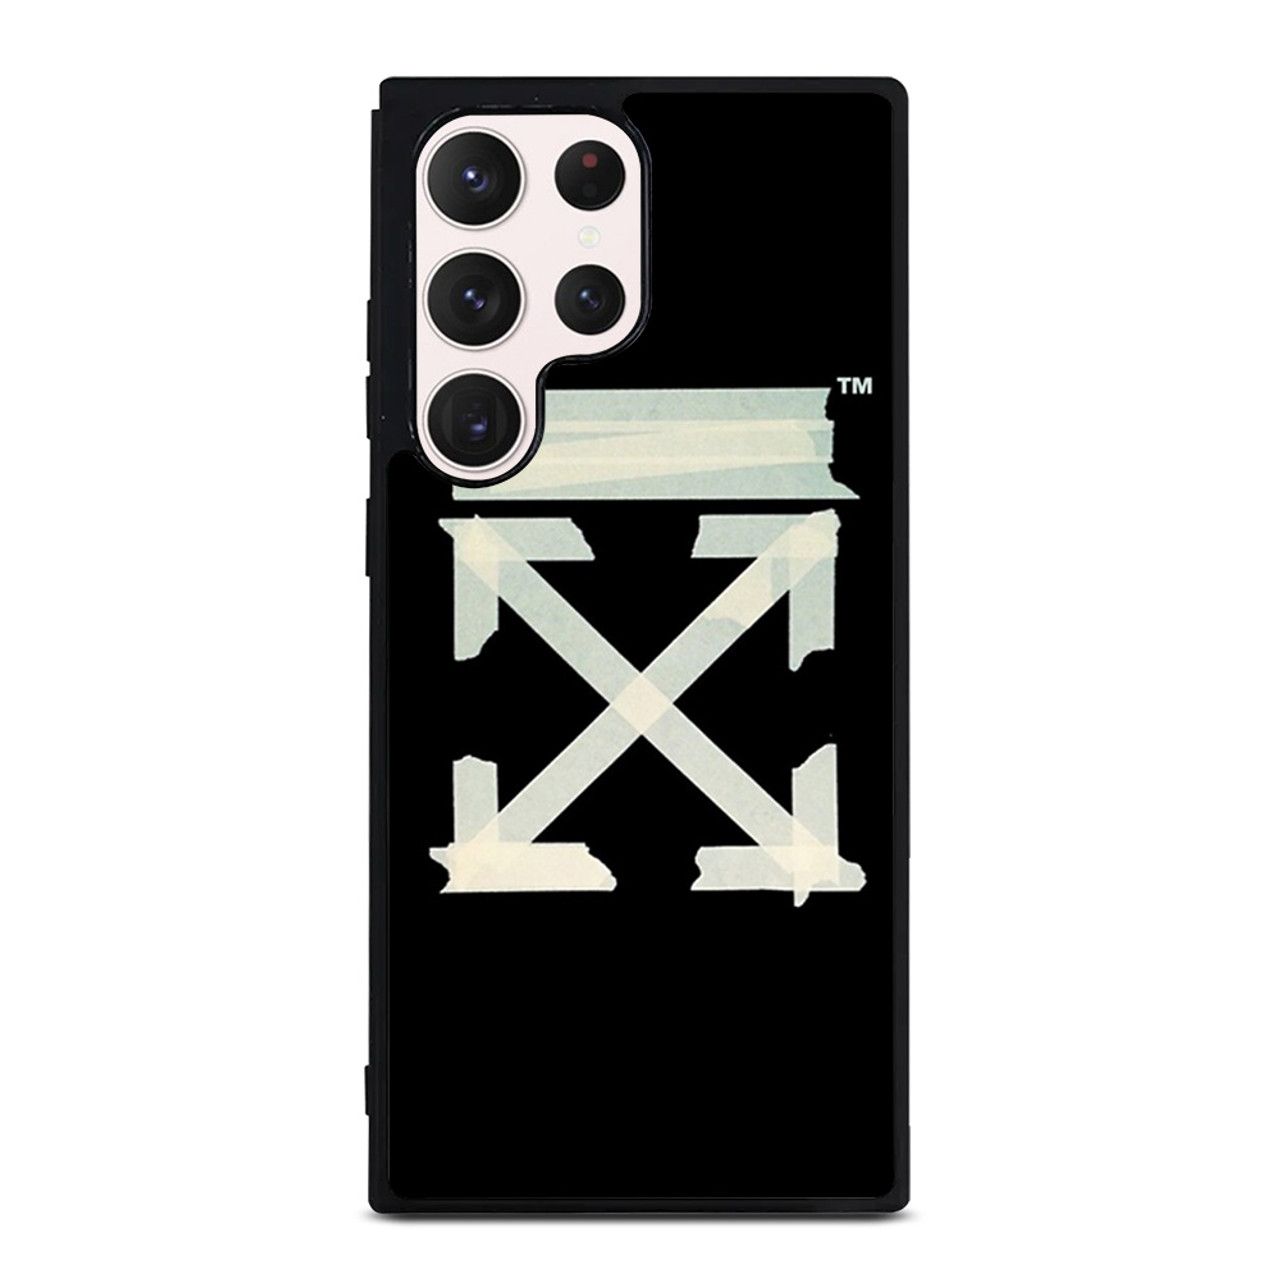 OFF WHITE TAPE LOGO Samsung Galaxy S23 Ultra Case Cover